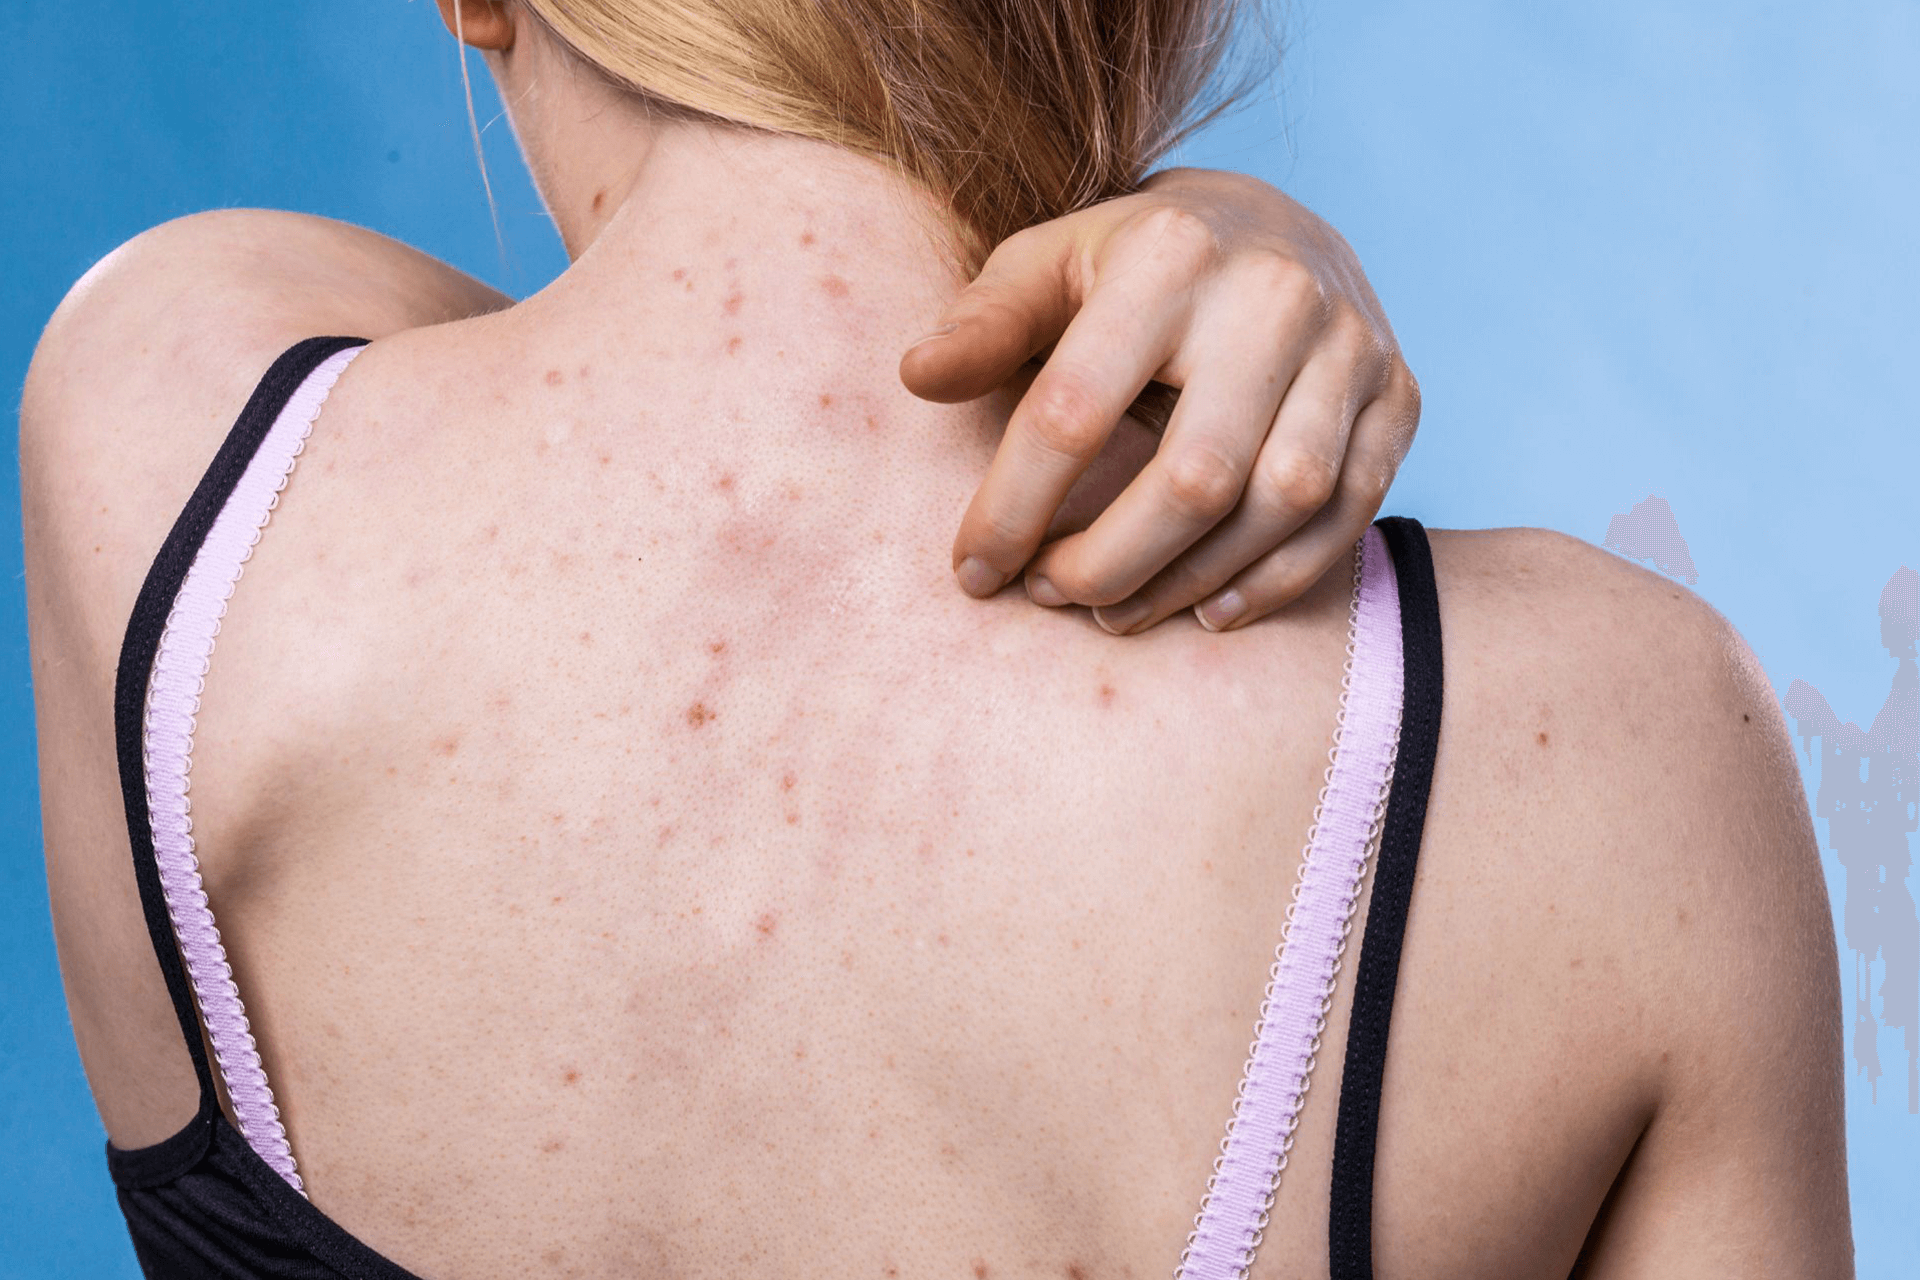  A woman scratching an acne breakout on her upper back
